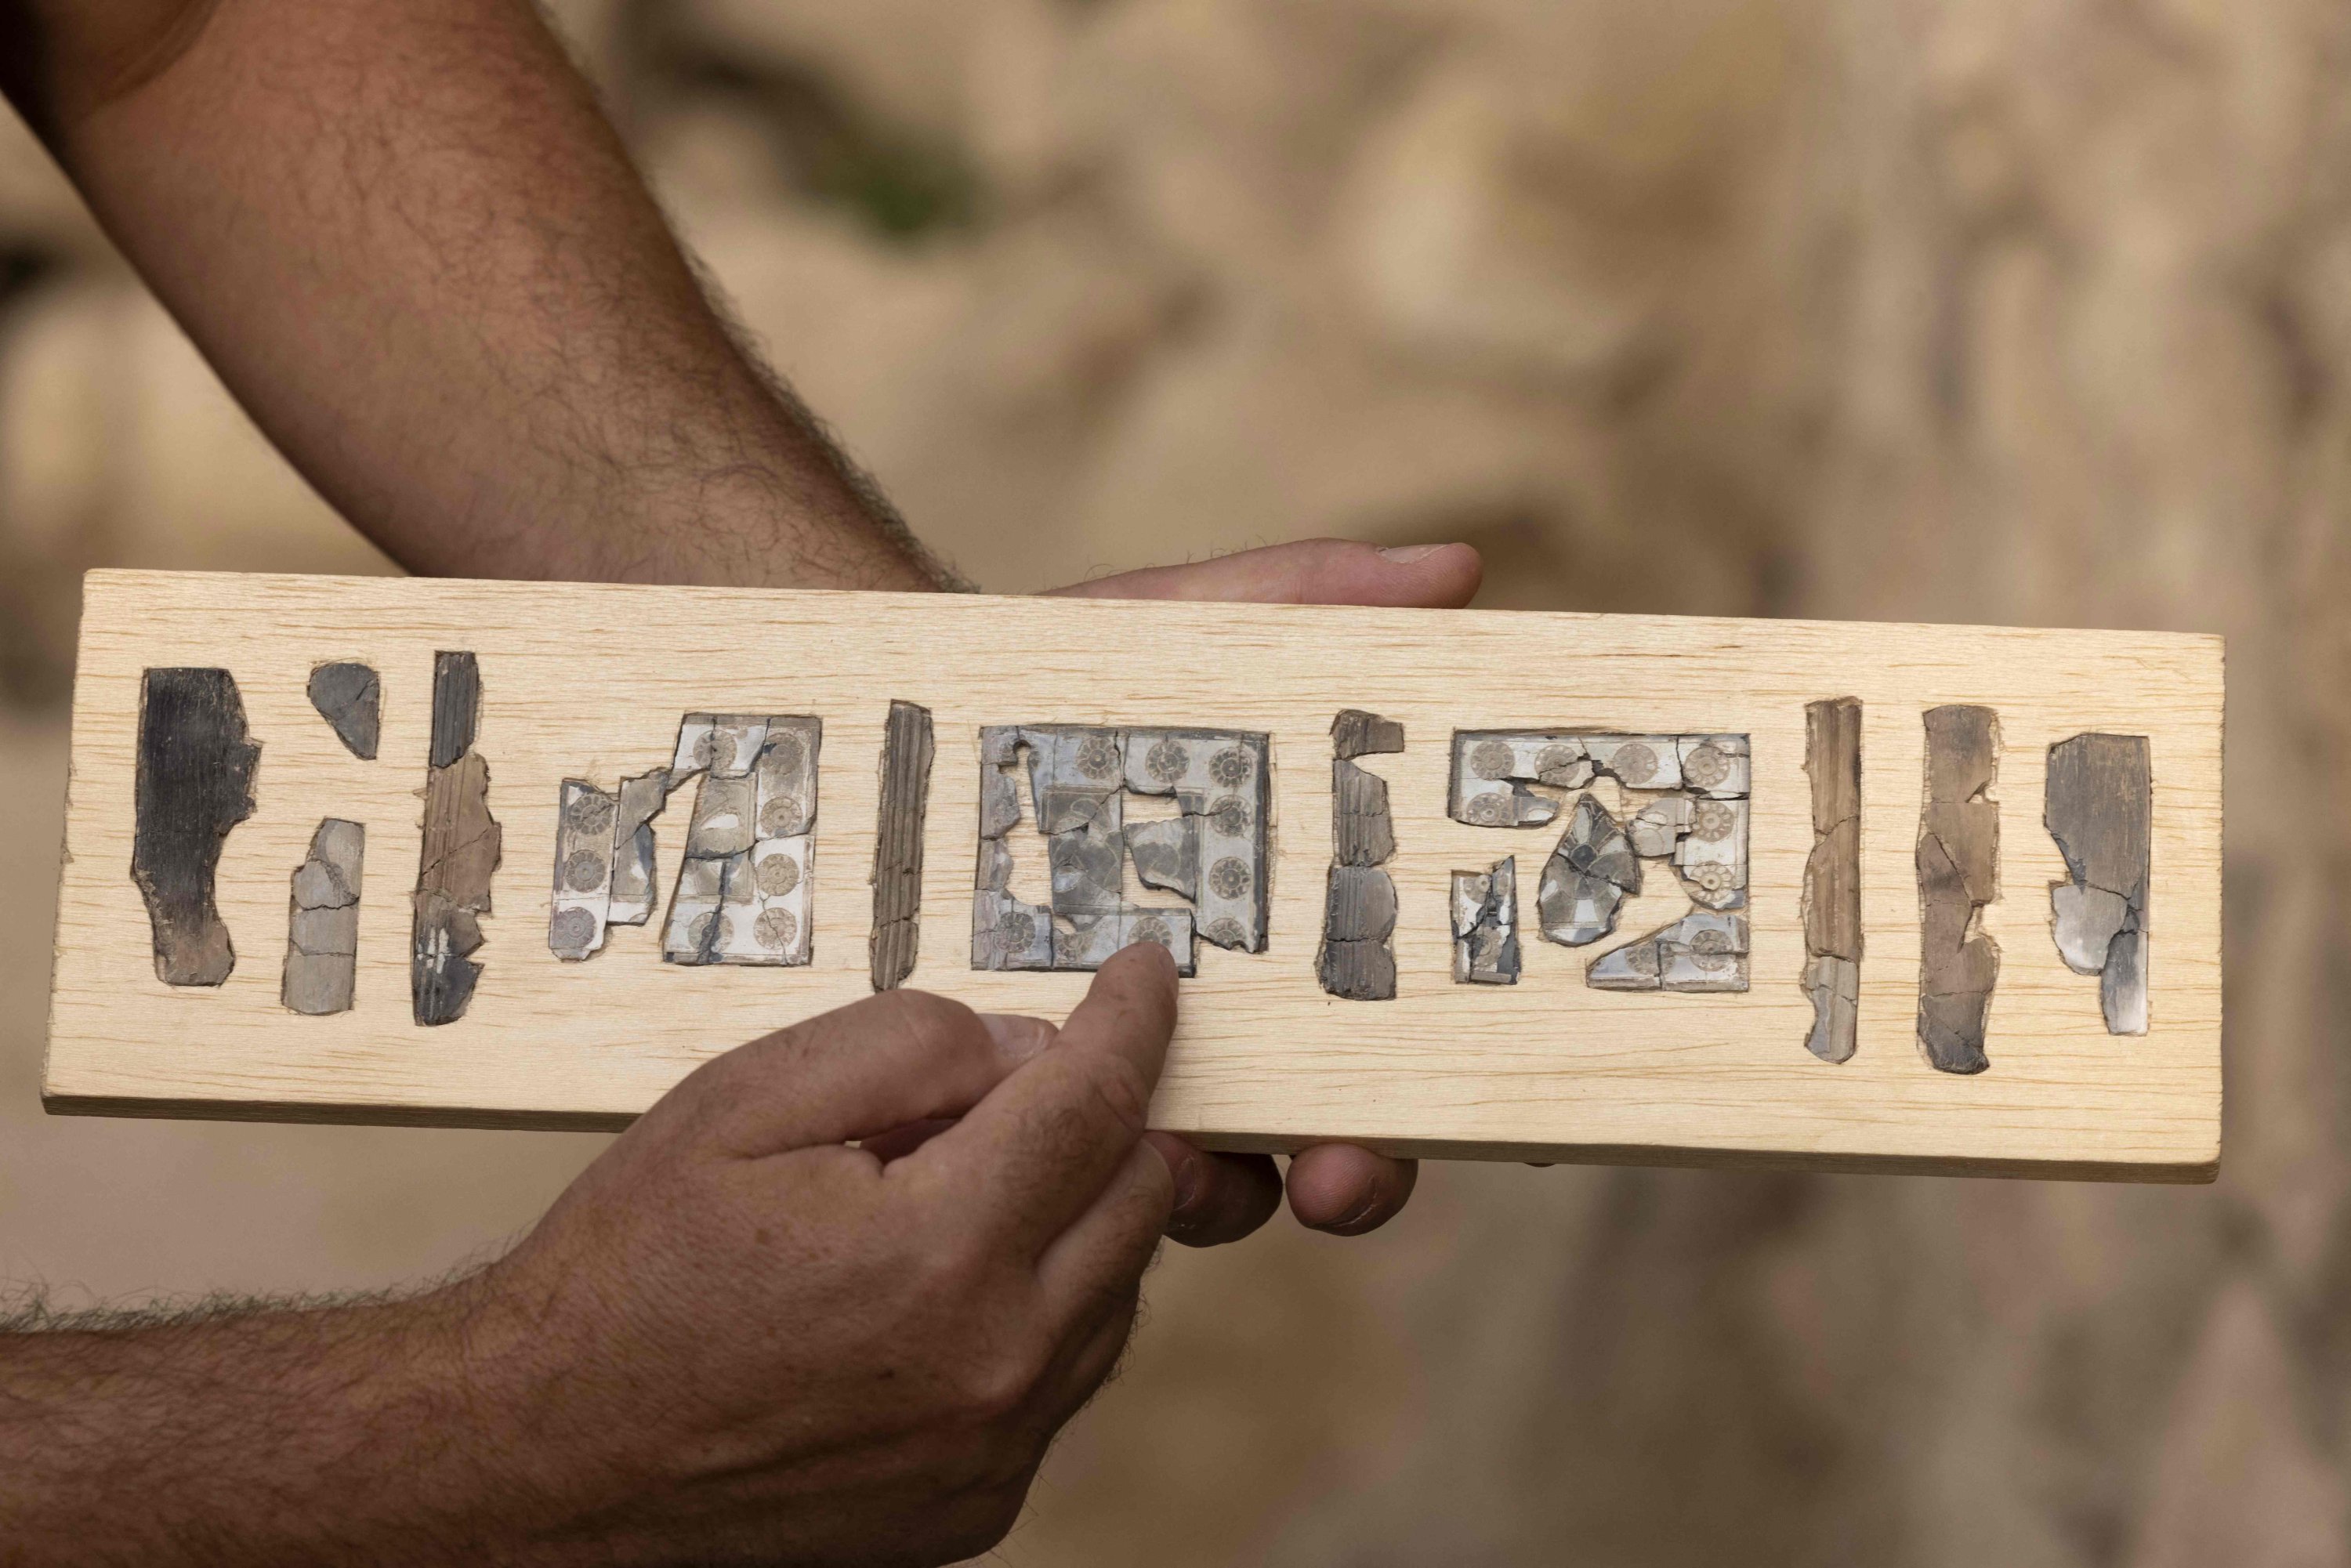 Yiftah Shalev displays ivory plaques unearthed in excavations in the Givati Parking Lot in the City of David National Park near the walls of the Old City of East Jerusalem, occupied Palestine, Sept. 5, 2022. (AFP Photo)